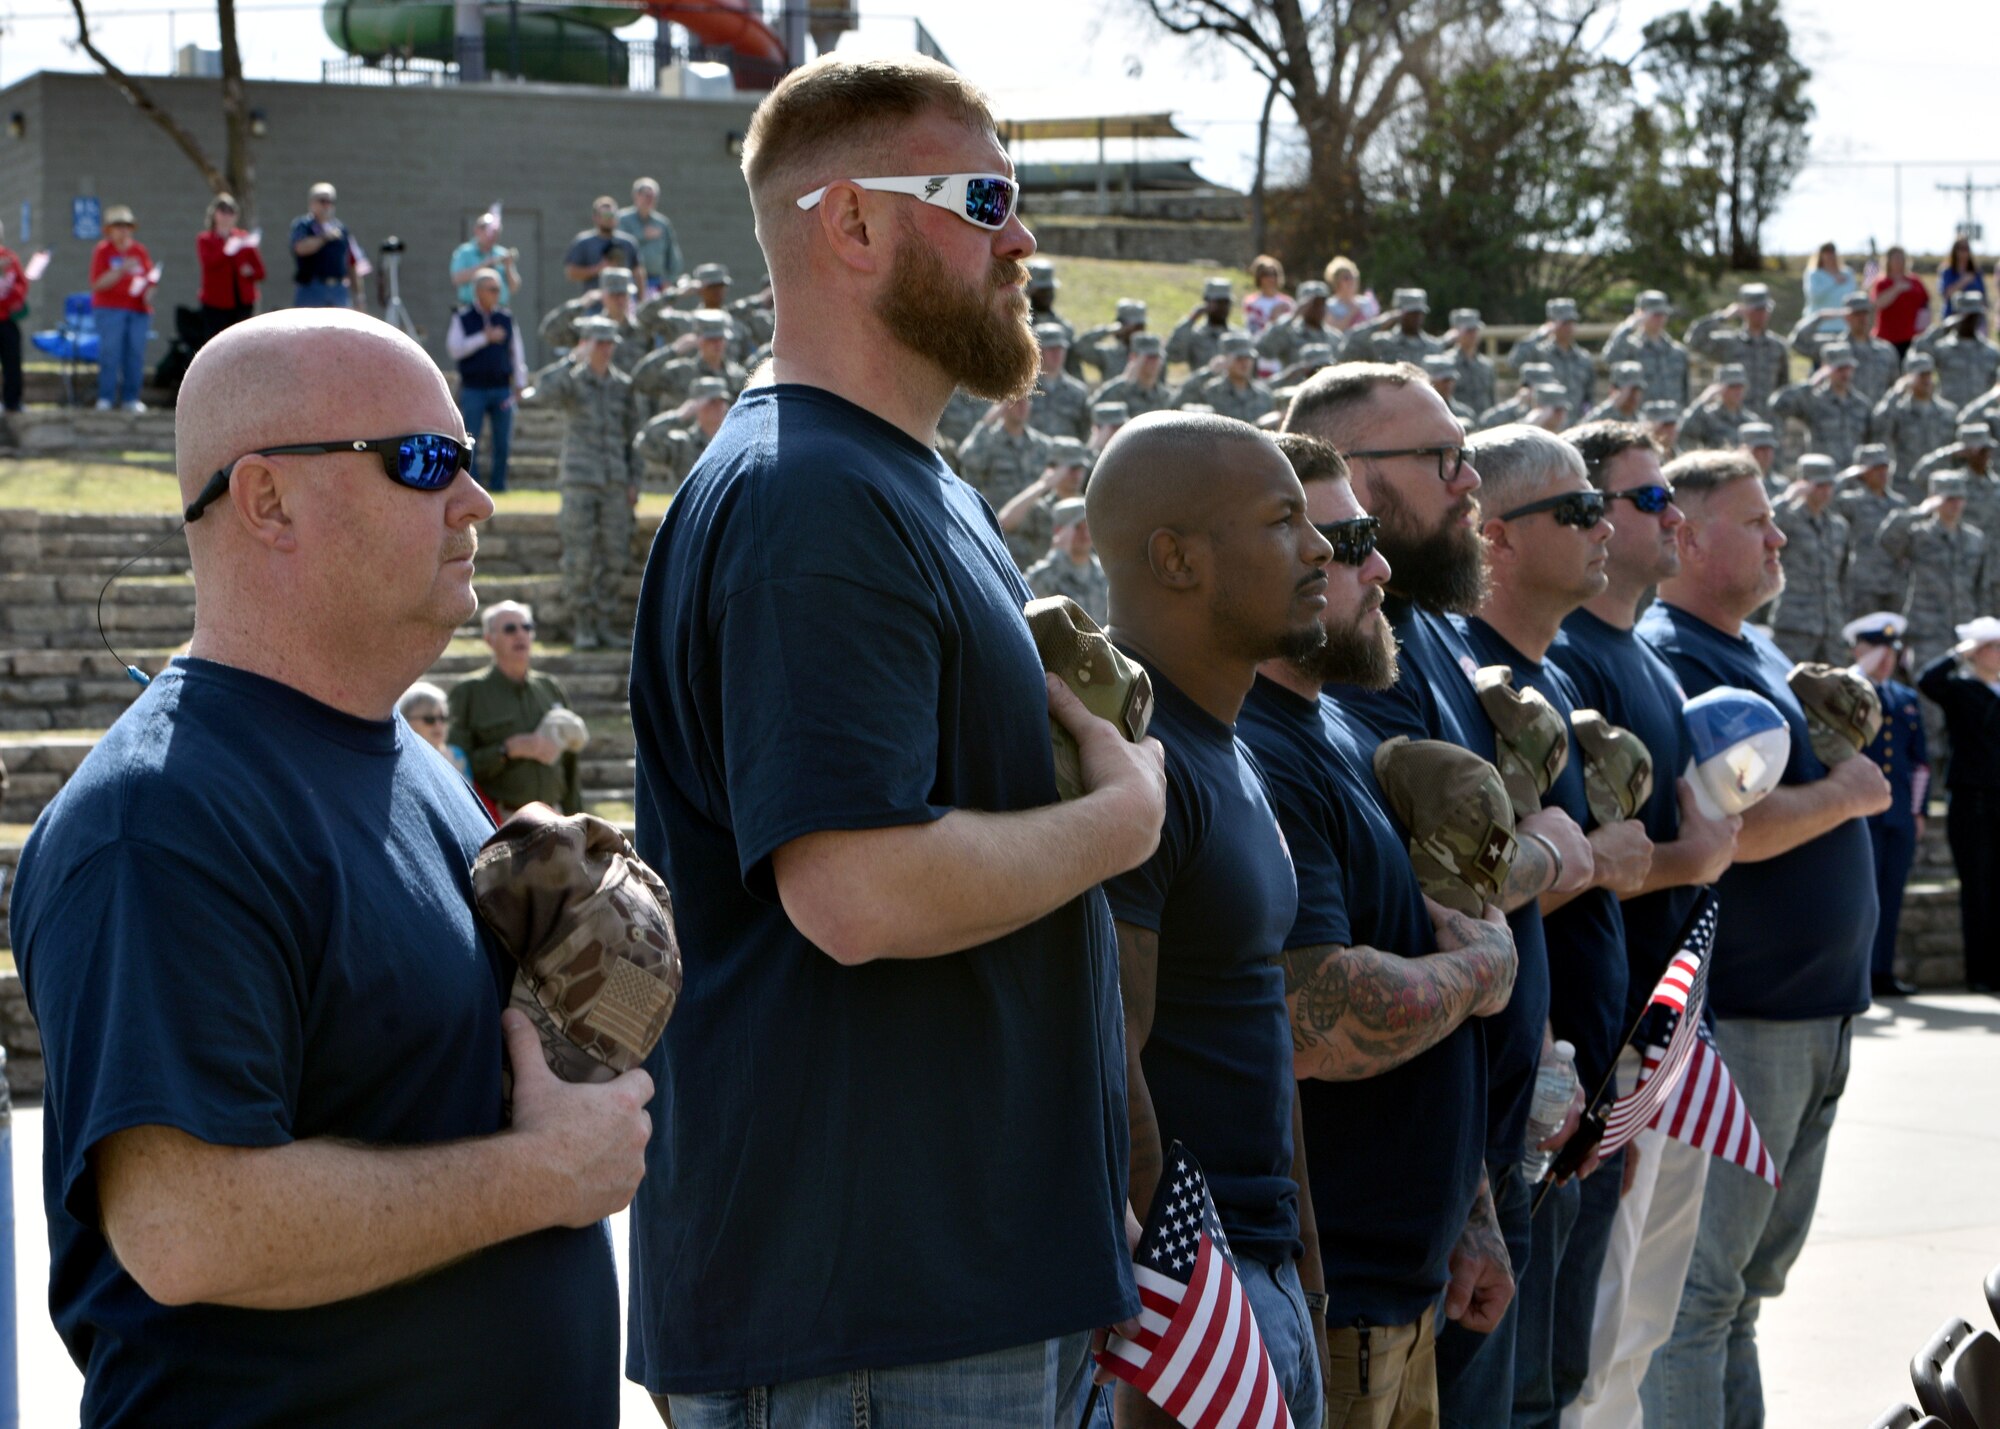 San Angelo Support for Veterans participants stand for the playing of the National Anthem during the San Angelo Support for Veterans Honor Ceremony at the Bill Aylor Sr. Memorial Riverstage in San Angelo, Texas, Dec. 5, 2019. After being honored at the ceremony, the veterans set off for a weekend of hunting and camaraderie. (U.S. Air Force photo by Airman 1st Class Robyn Hunsinger)